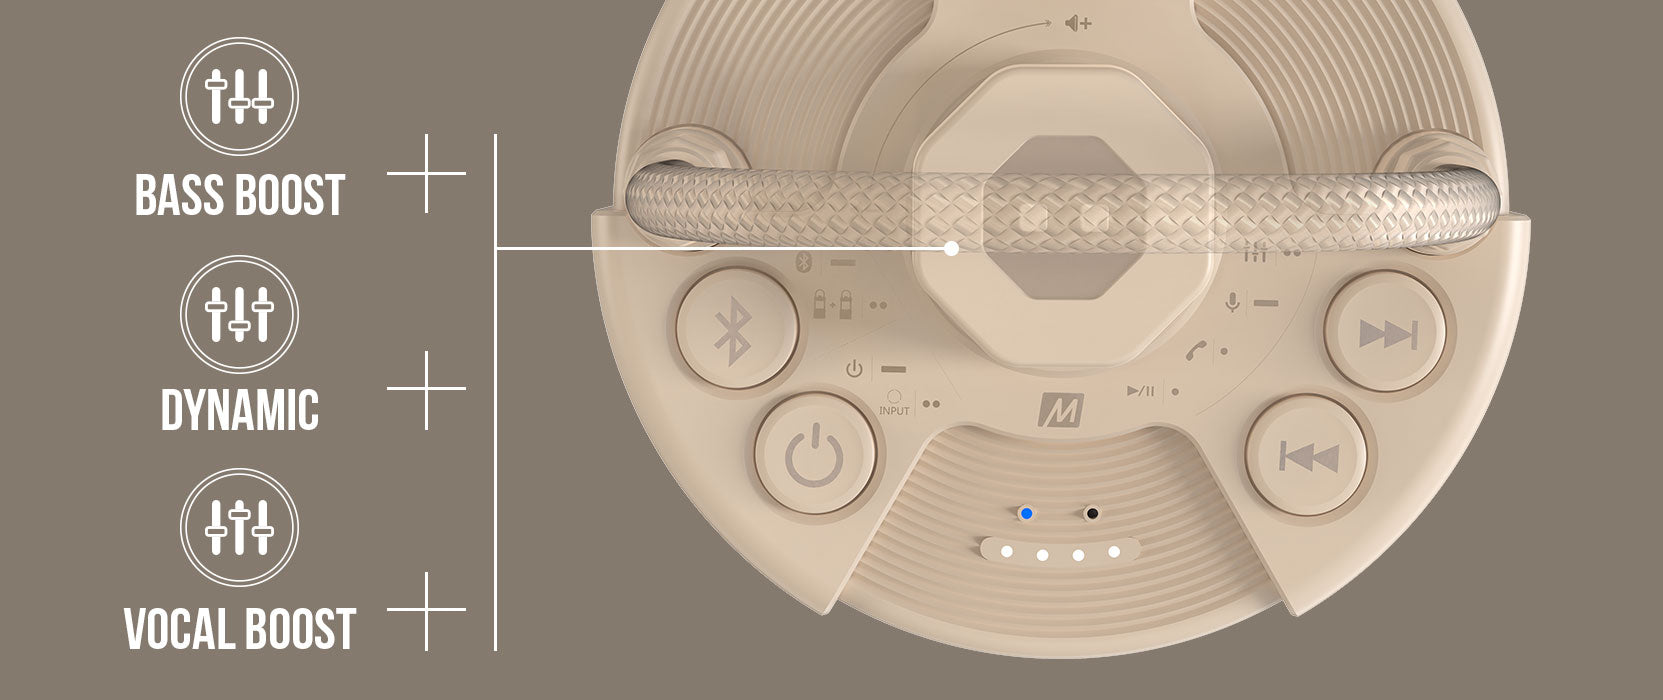 Illustration of a beige speaker with various control buttons and a textured speaker cover. includes icons representing bass boost, dynamic, and vocal boost sound settings.